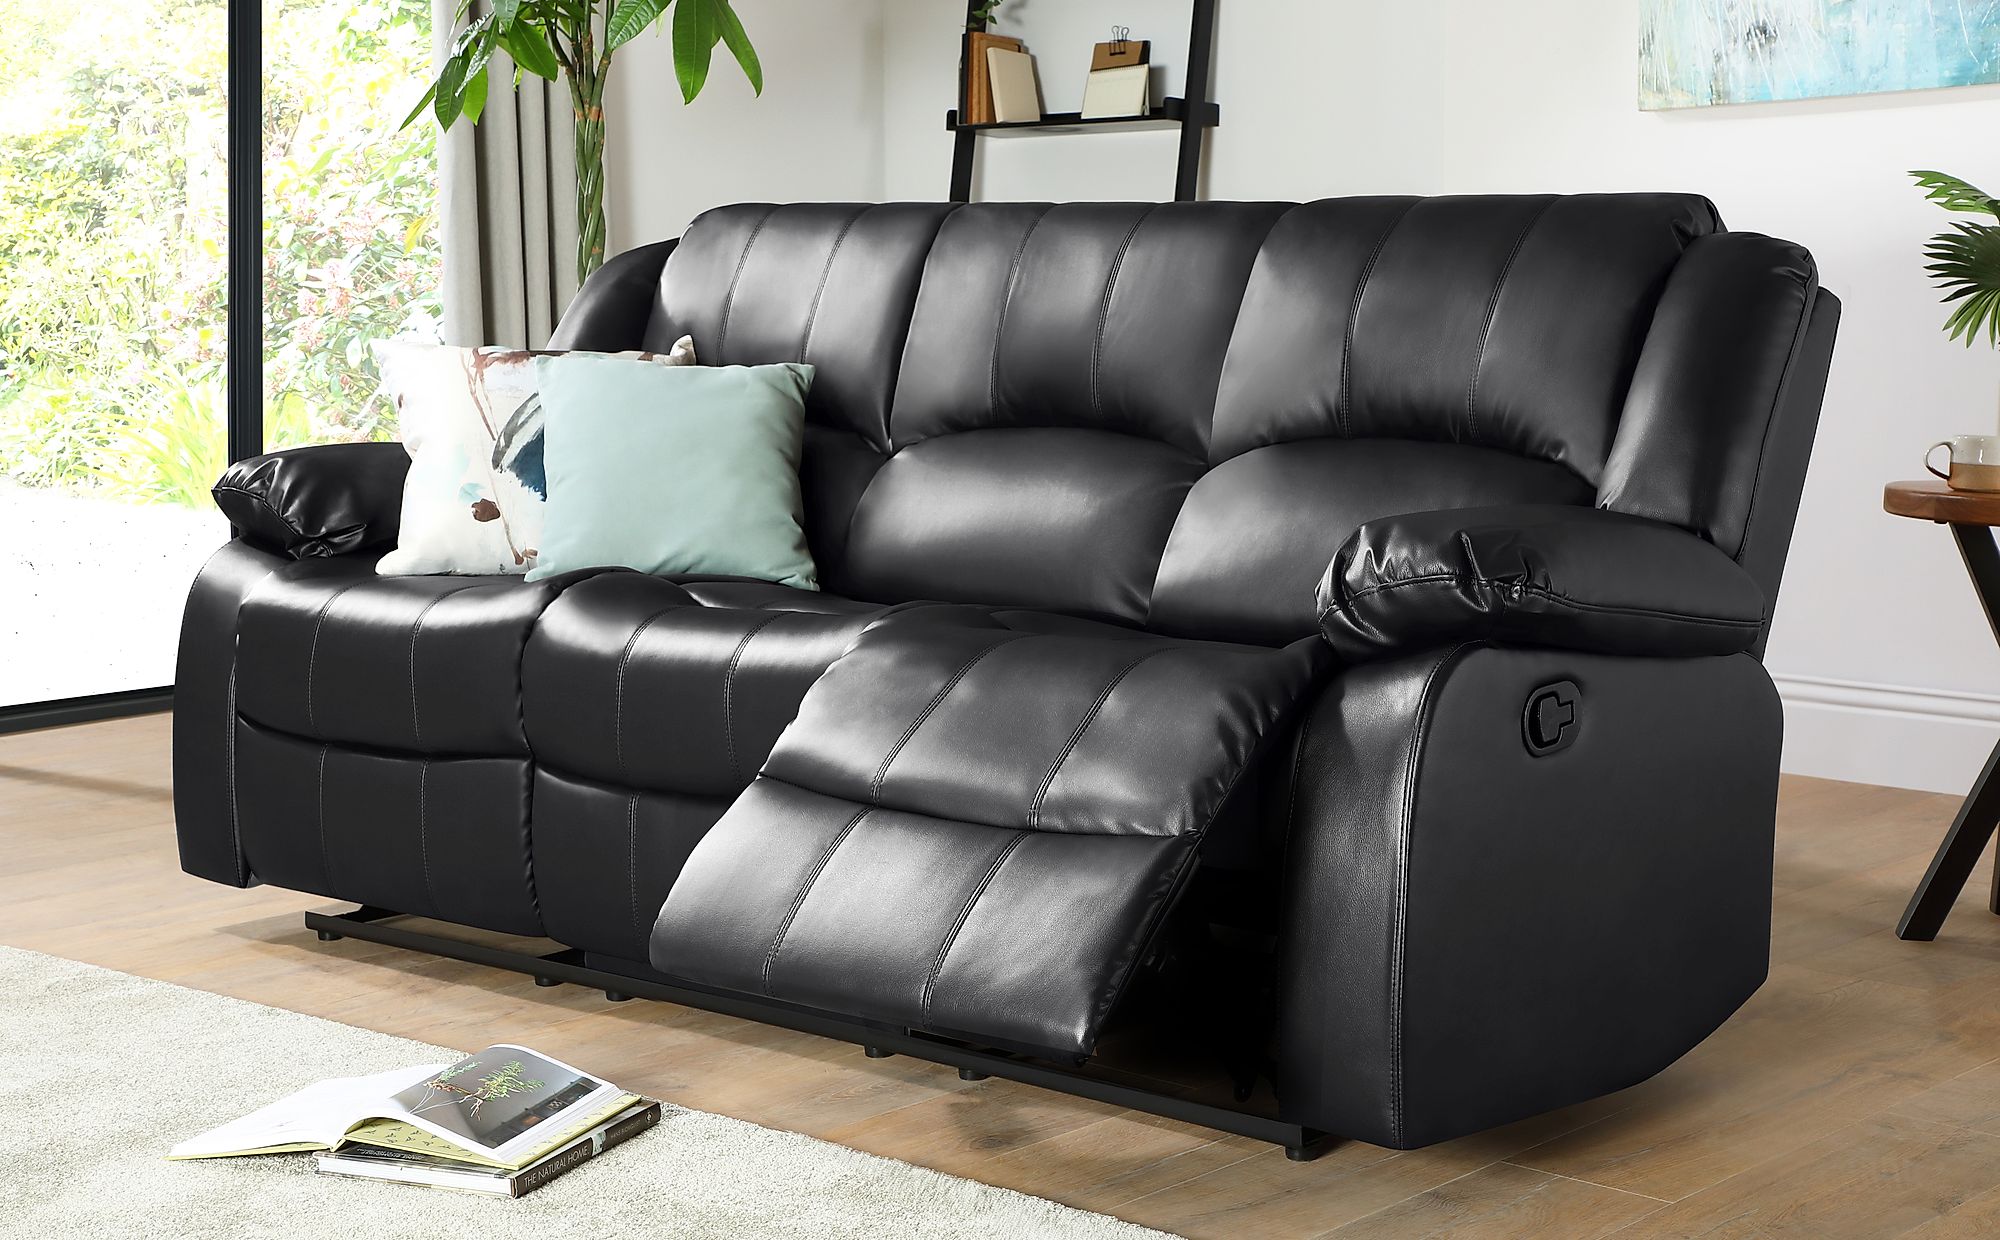 black leather sofa and recliner set